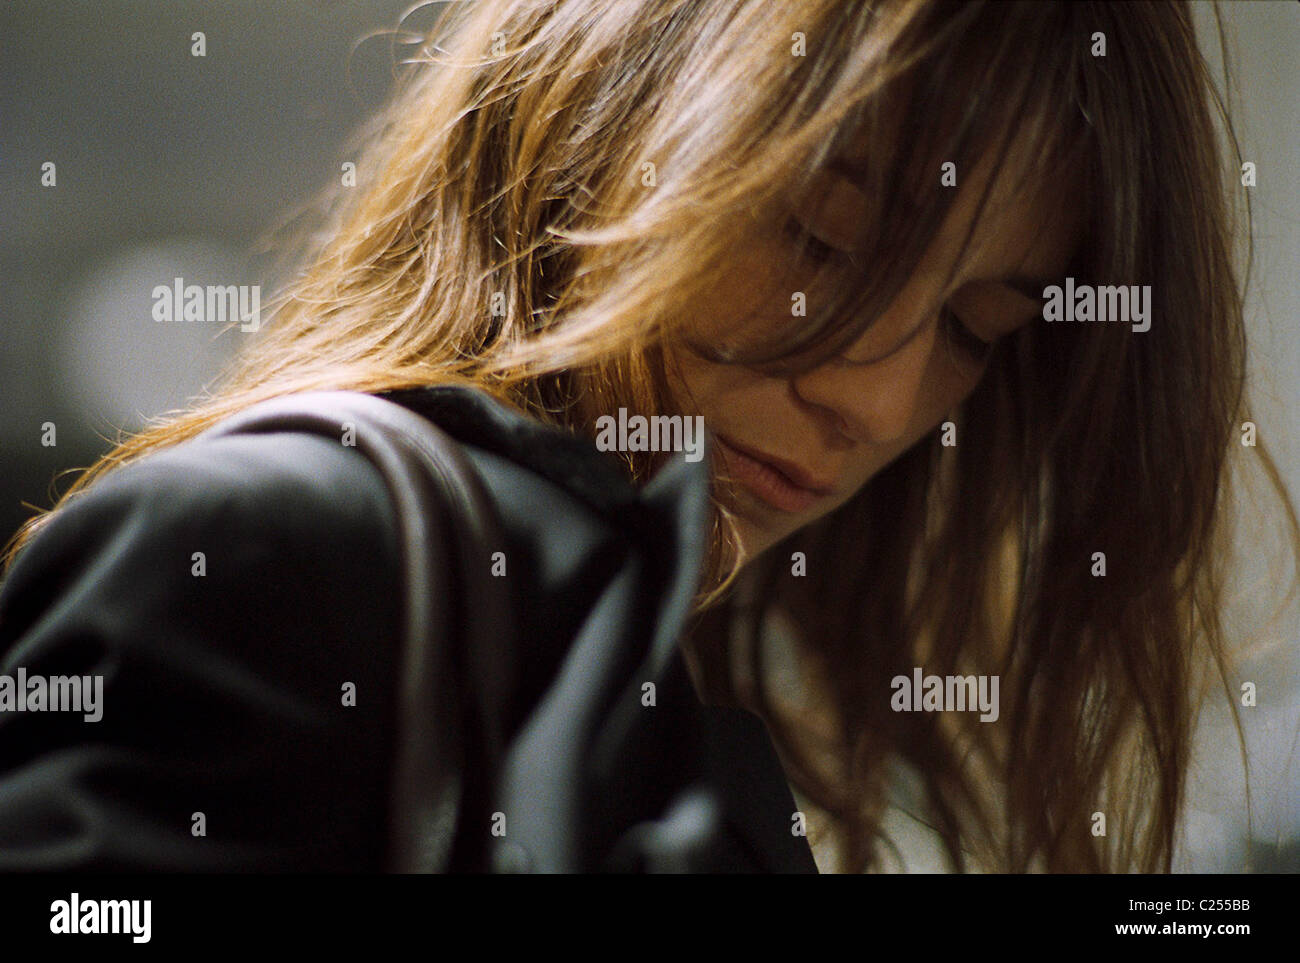 PERSECUTION (2009) CHARLOTTE GAINSBOURG PATRICE CHEREAU (DIR) 001 MOVIESTORE COLLECTION LTD Stock Photo